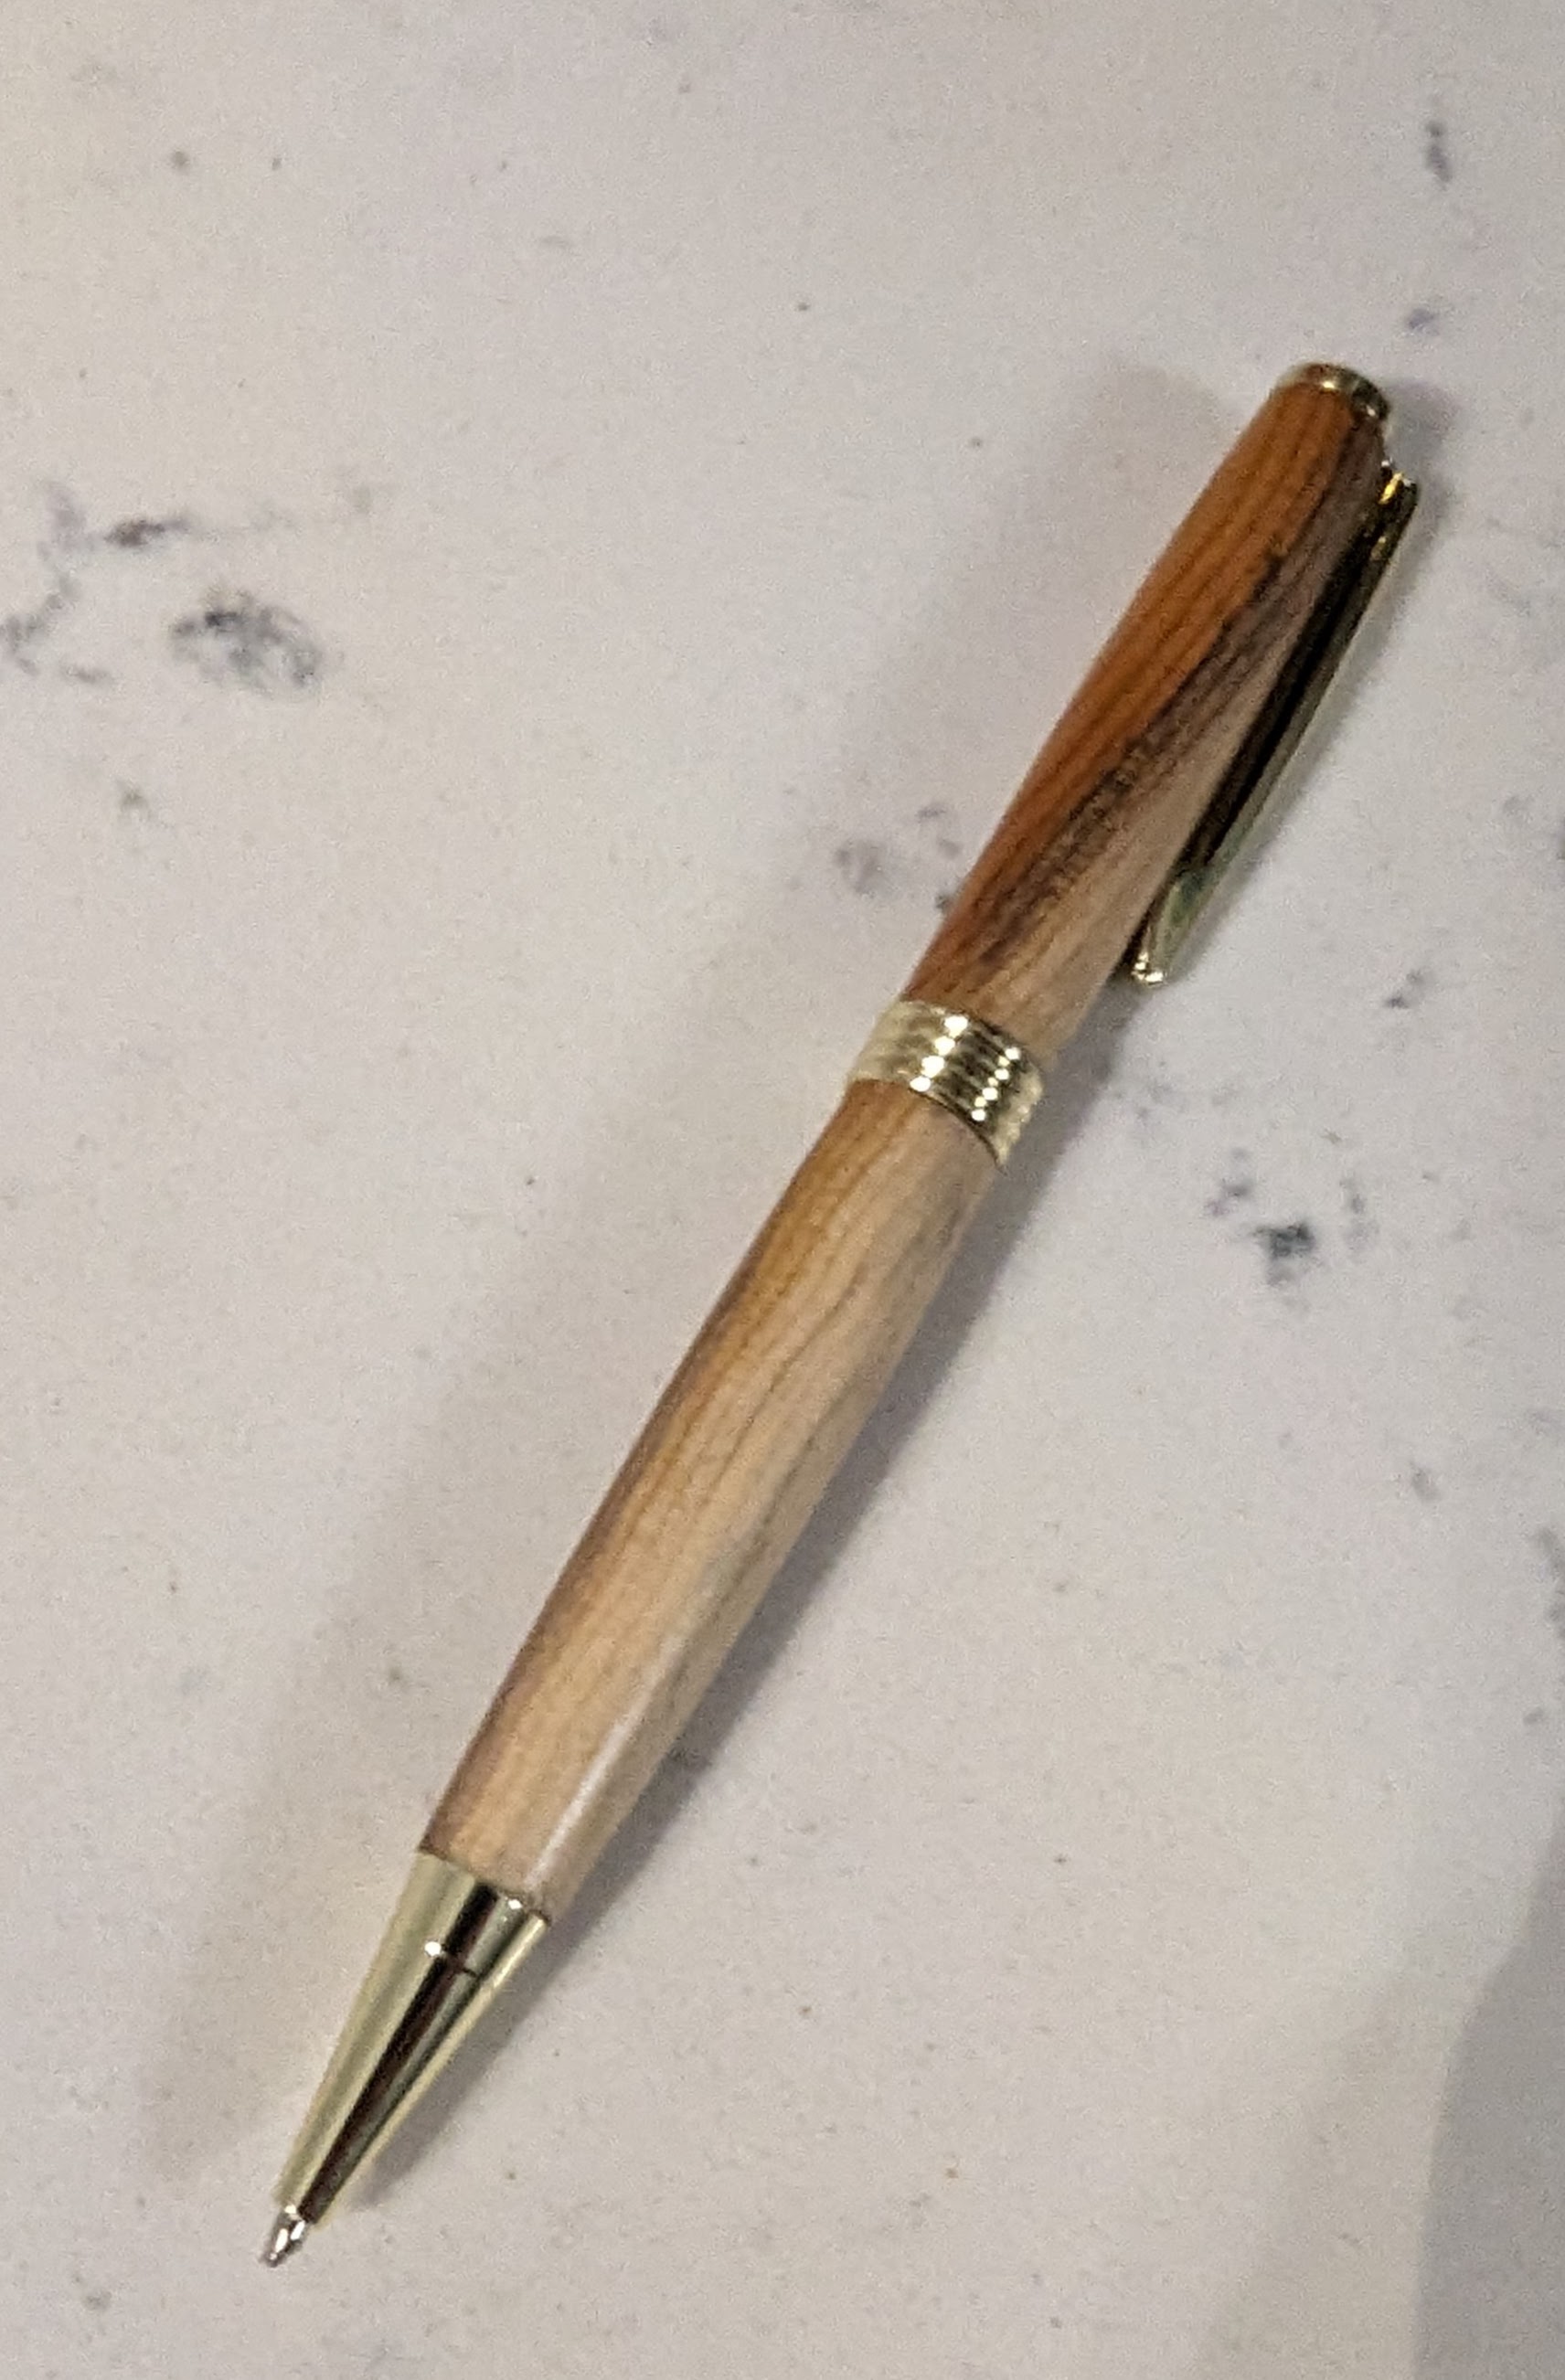 Love the grain on this yew pen